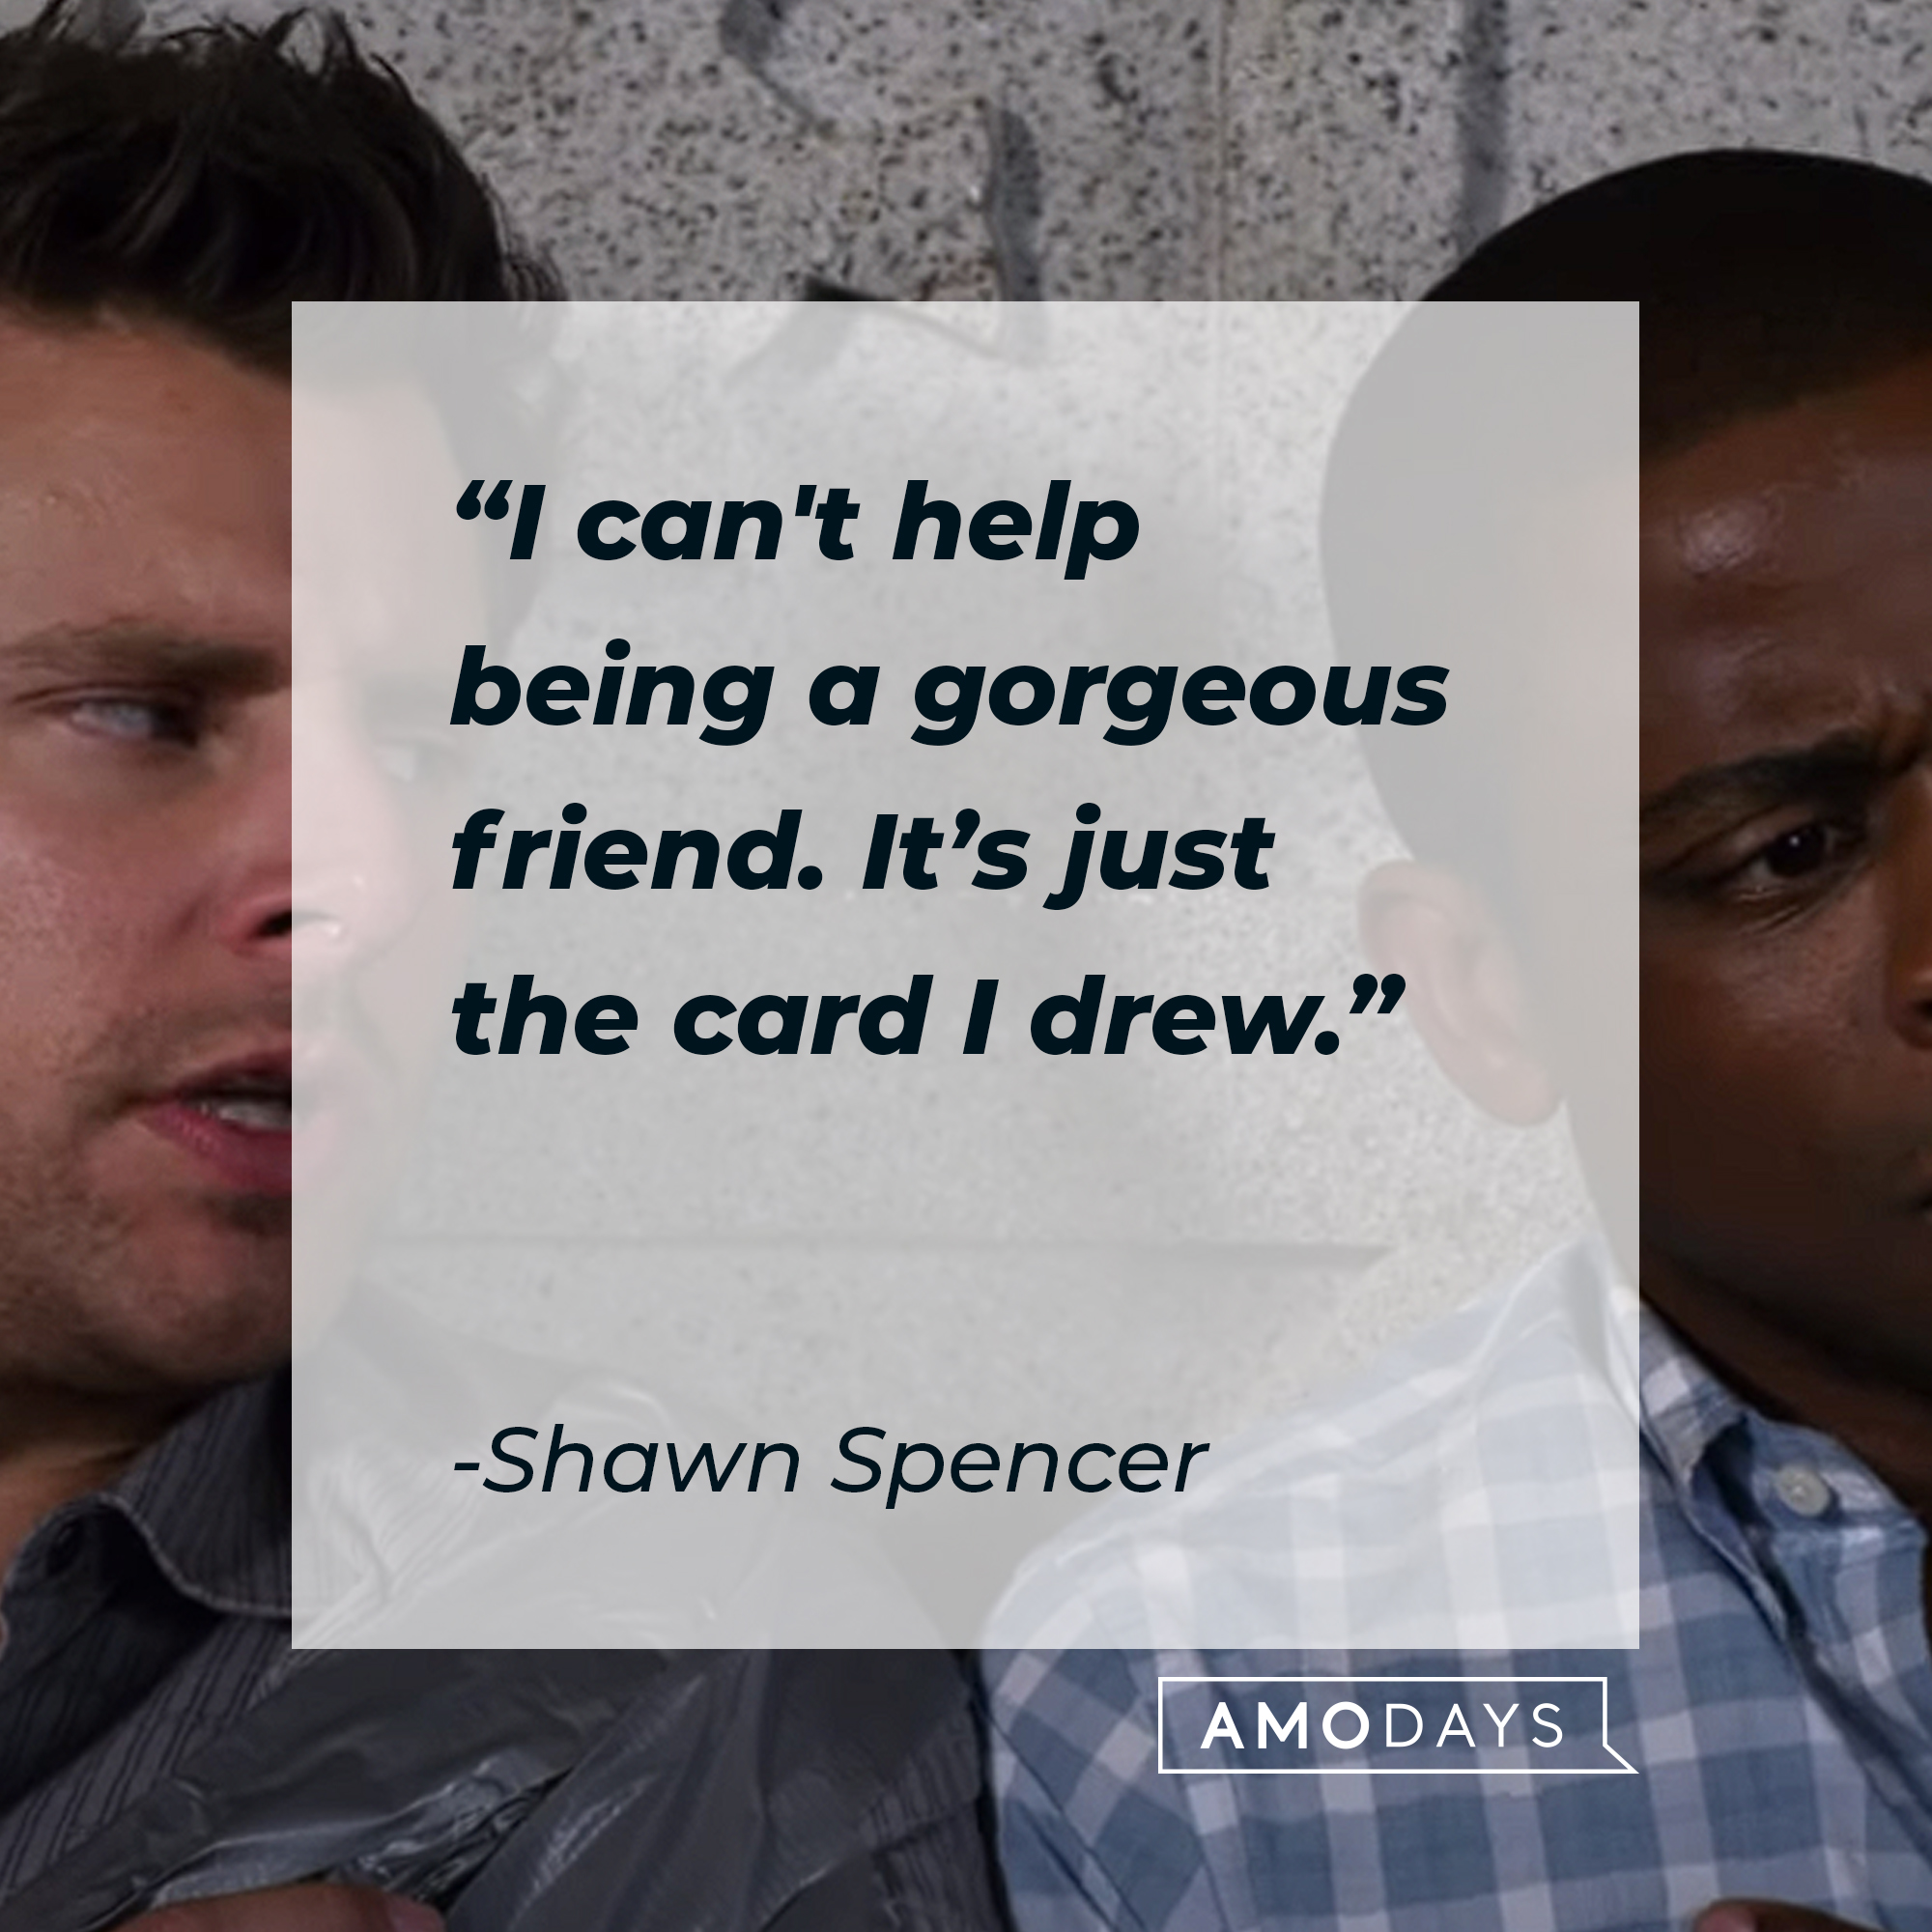 Shawn Spencer's quote: "I can't help being a gorgeous friend. It's just the card I drew." | Source: youtube.com/Psych